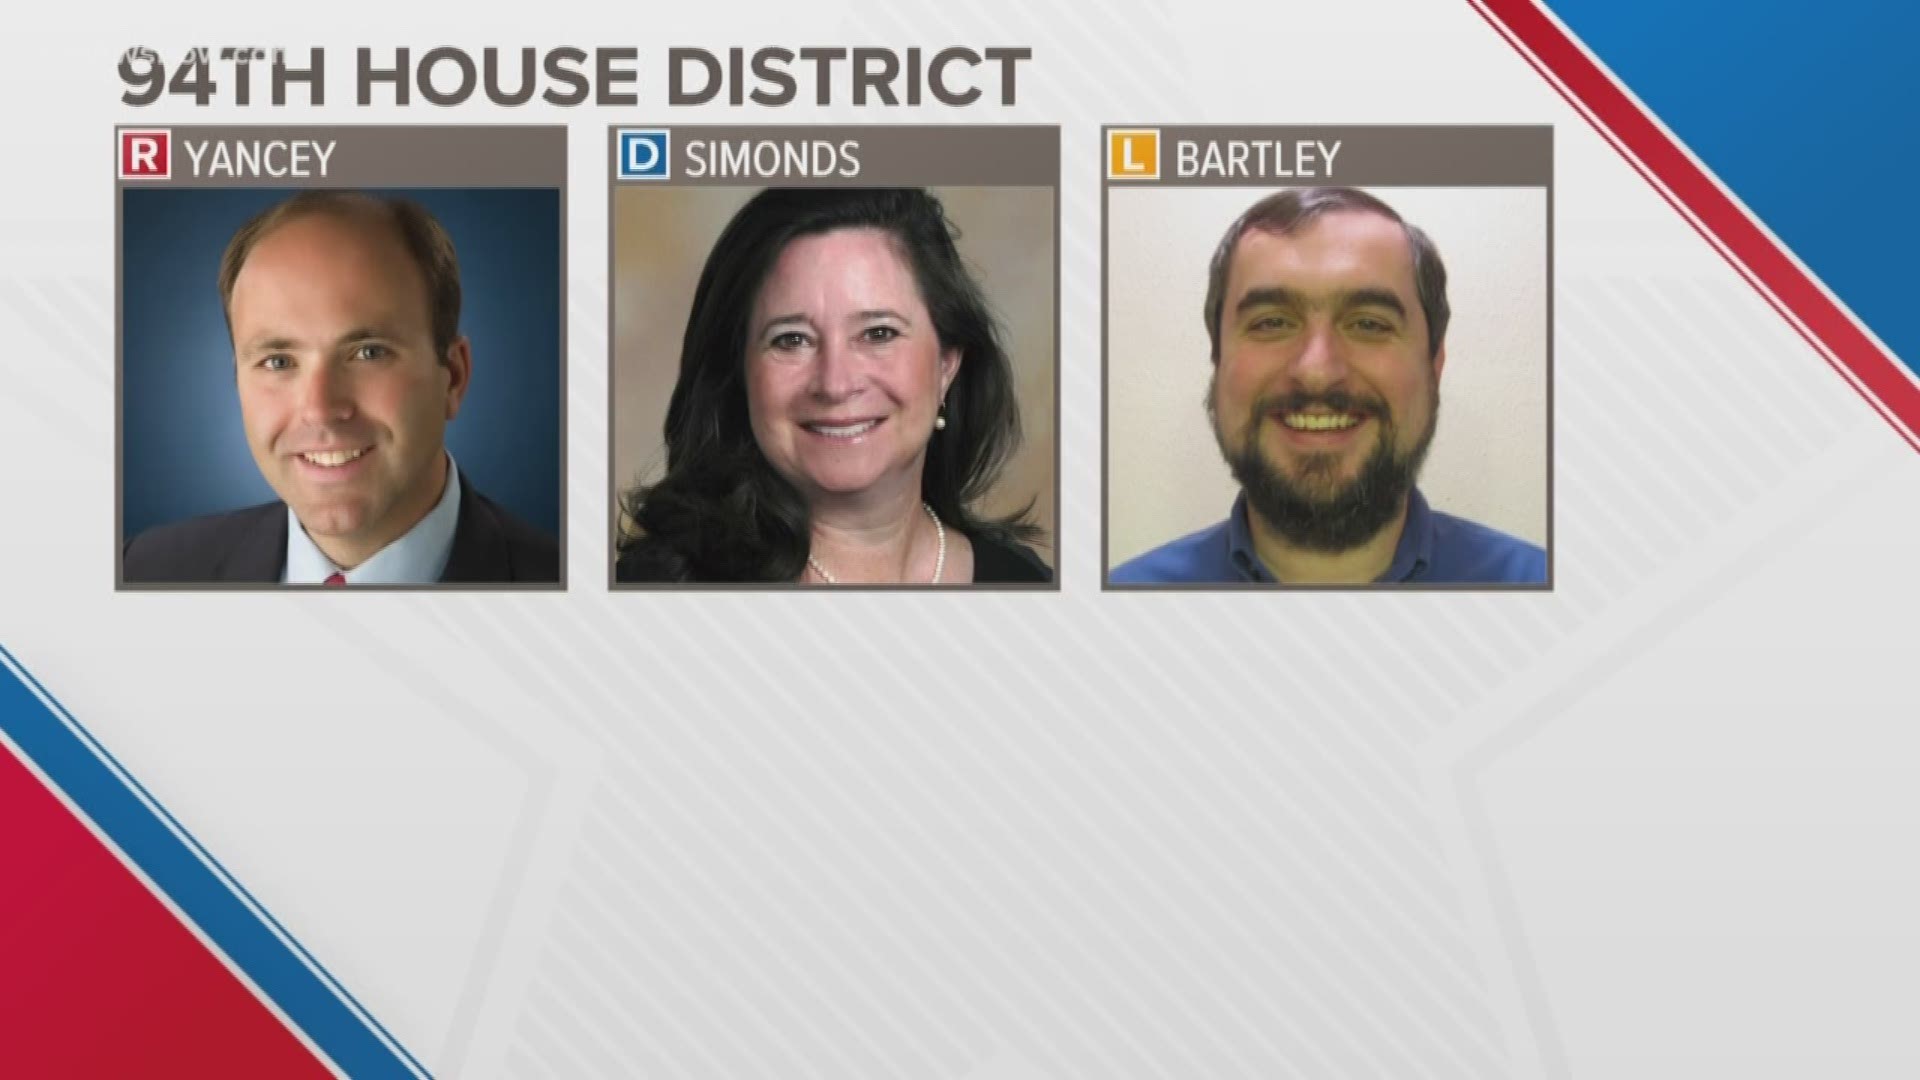 In the 94th House District in 2017, Shelly Simonds and David Yancey each got 11,608 votes. Now the two will face off again with a third candidate, Michael Bartley